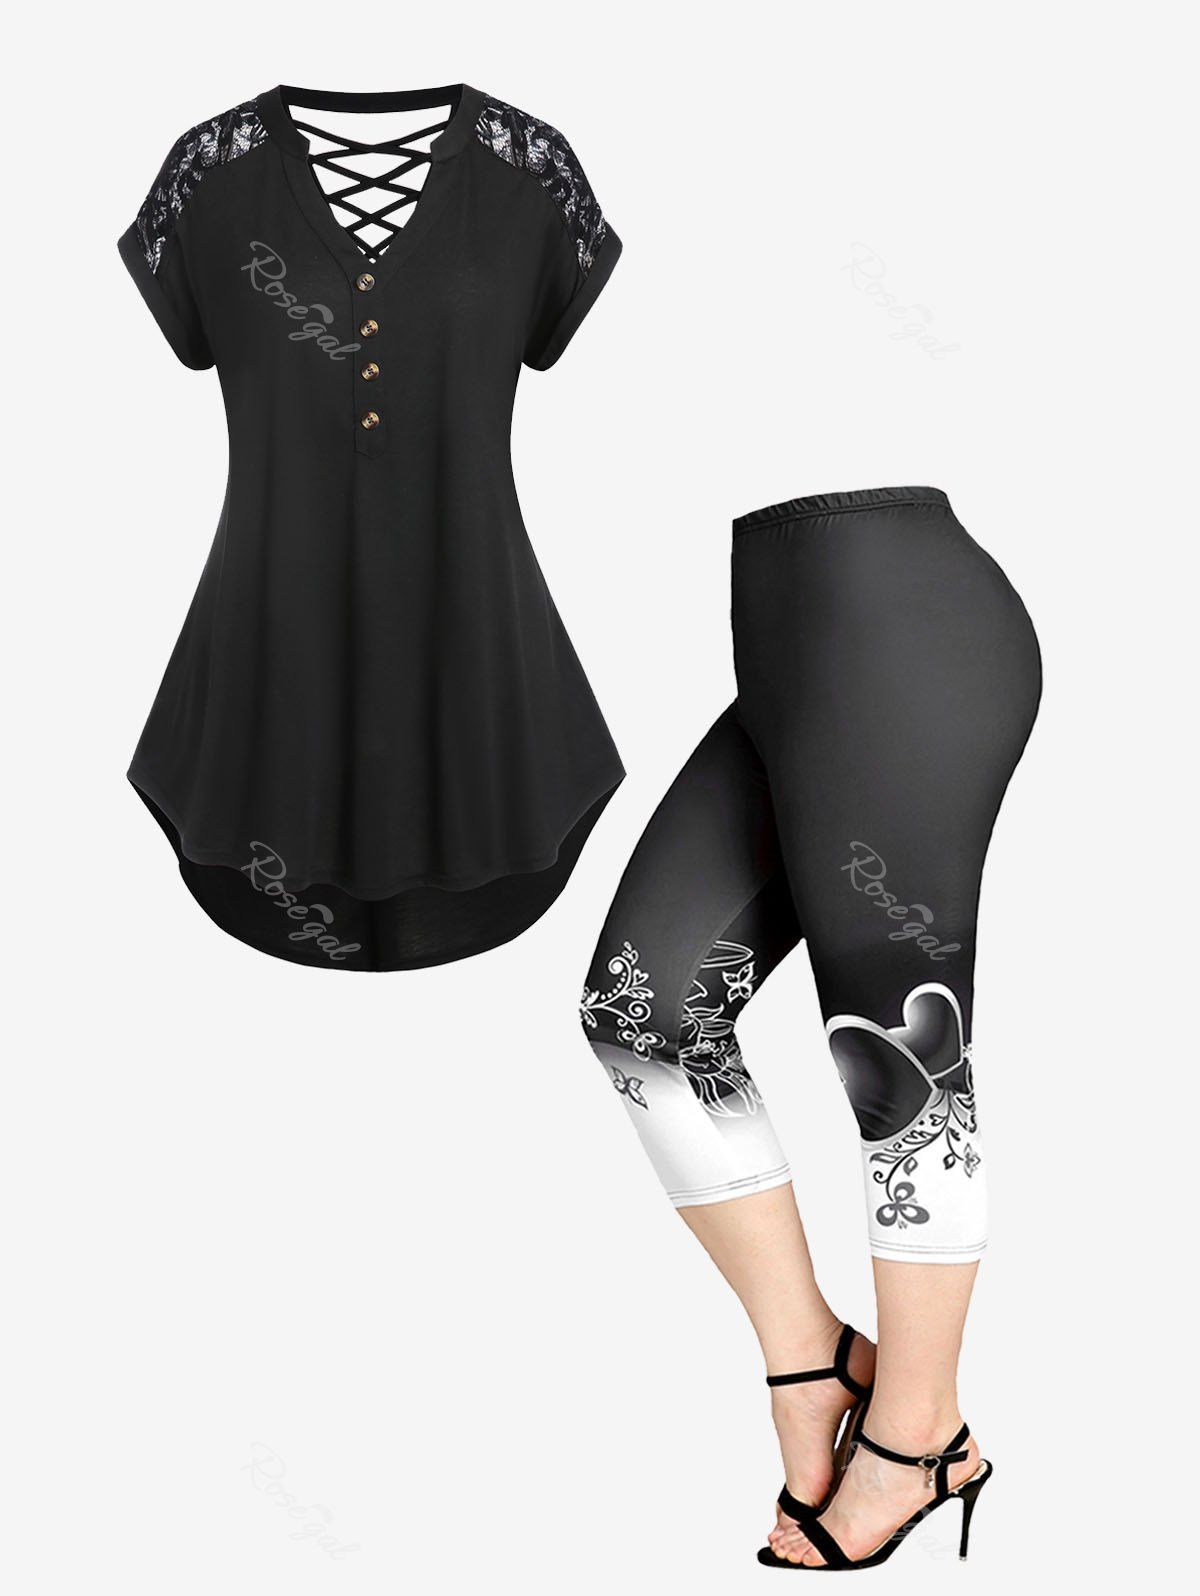 Fancy Lace Insert Crisscross High Low Top and High Waist Heart Floral Print Capri Leggings Plus Size Summer Outfit  